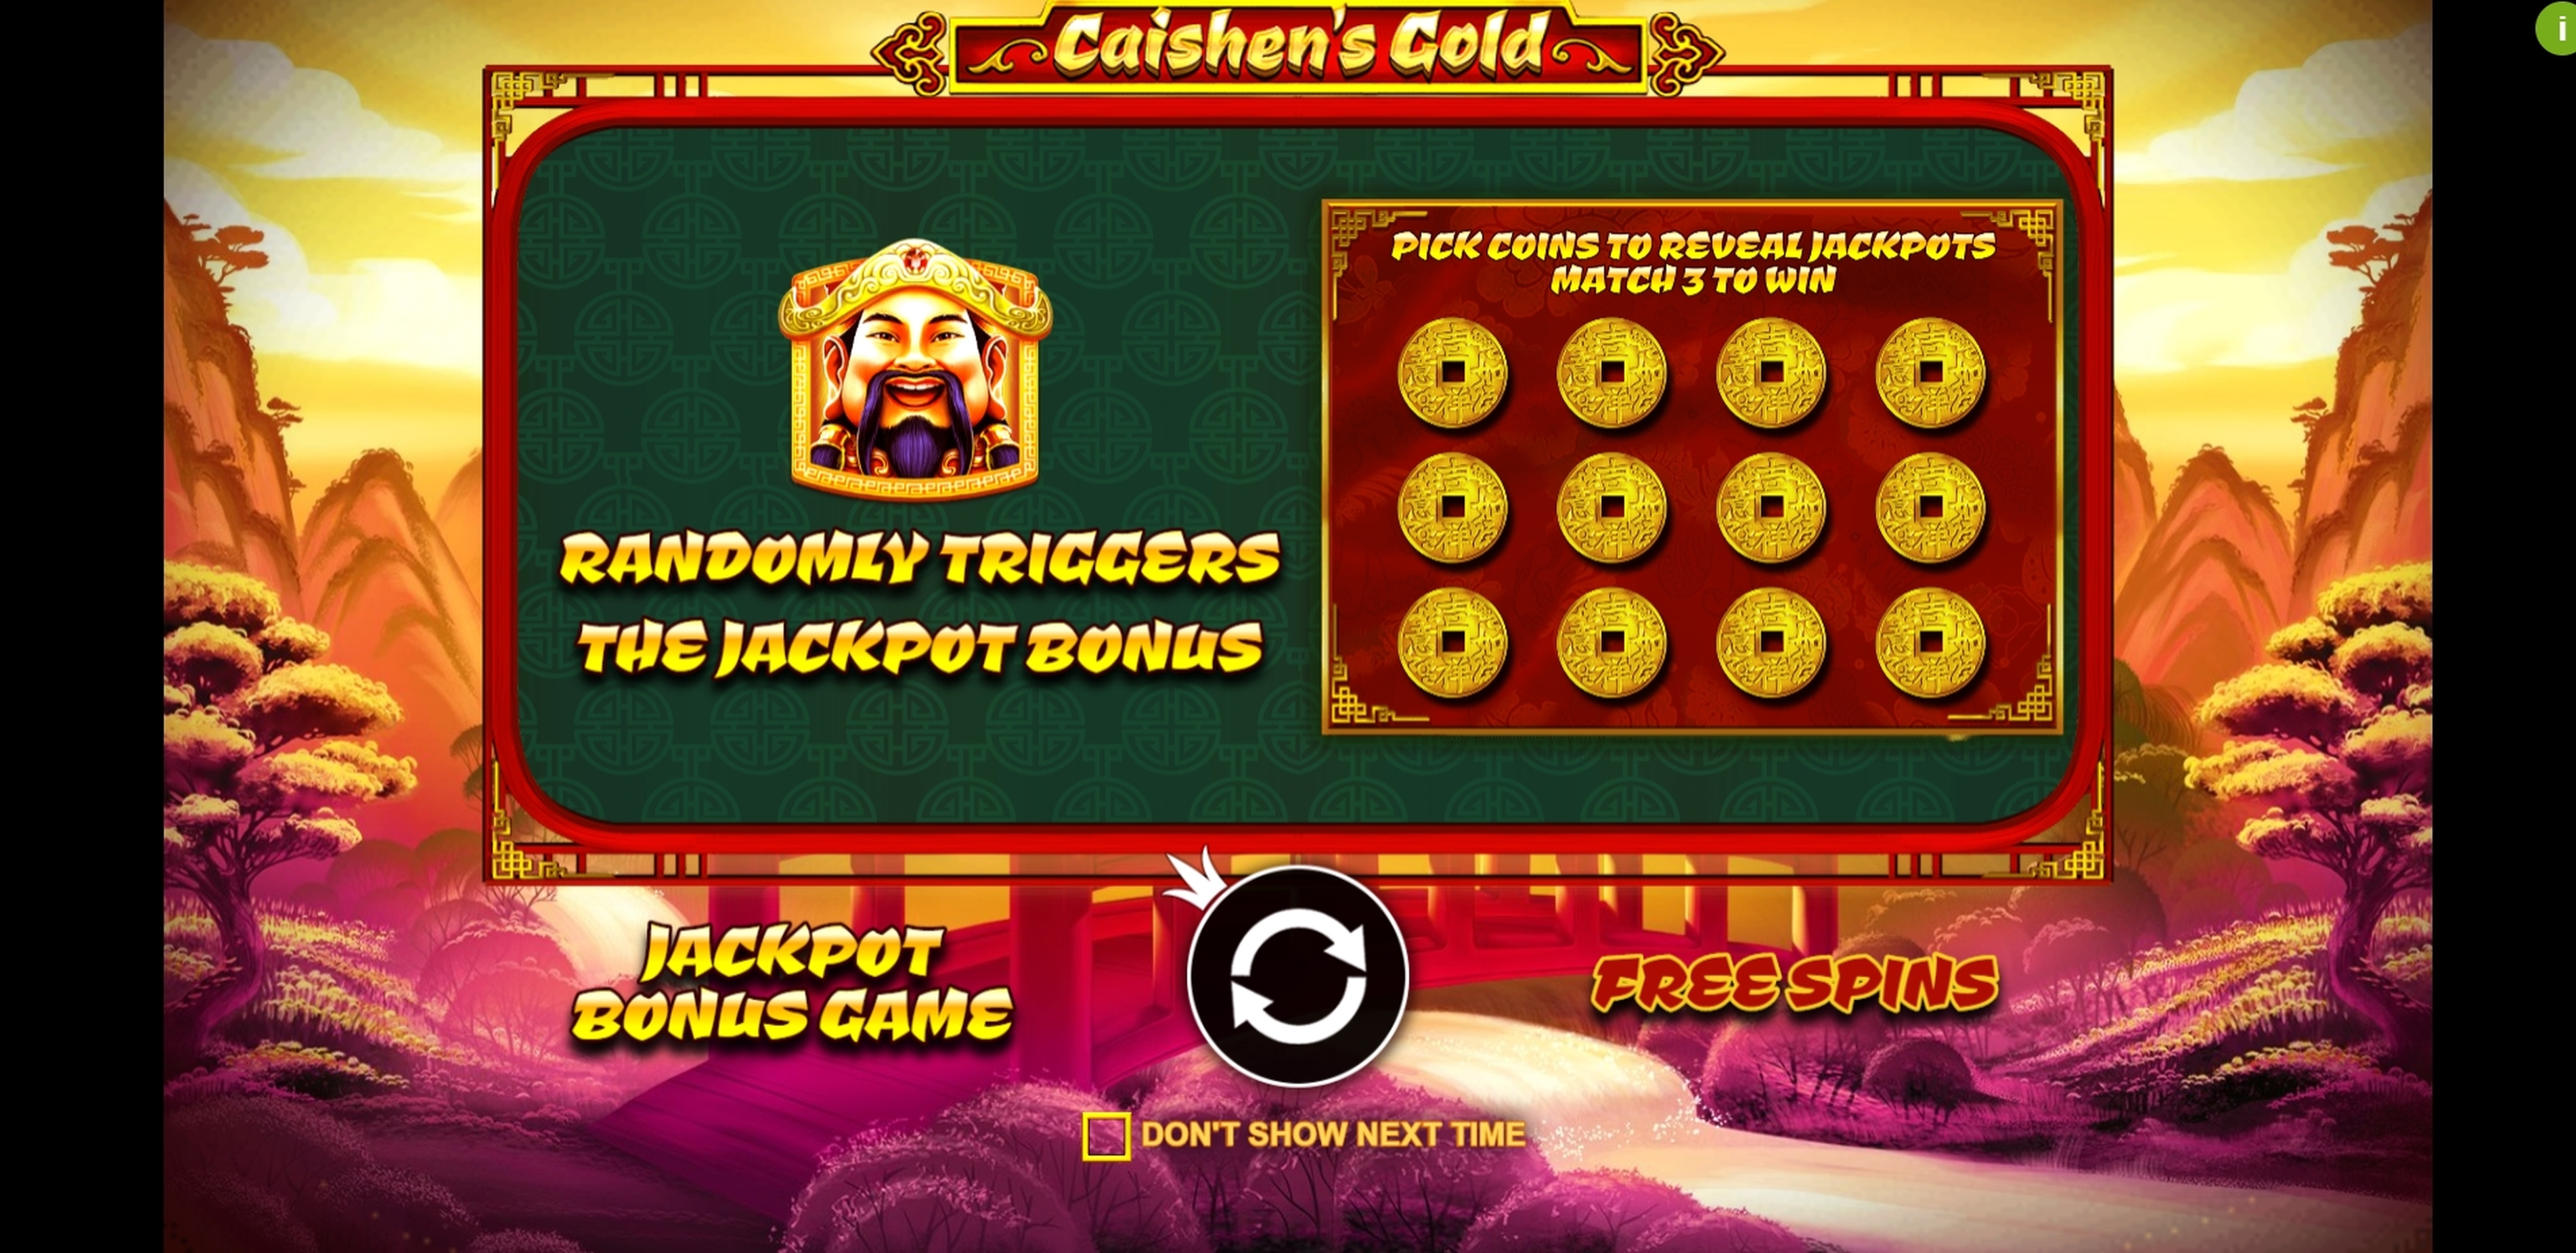 Play Caishen's Gold Free Casino Slot Game by Pragmatic Play